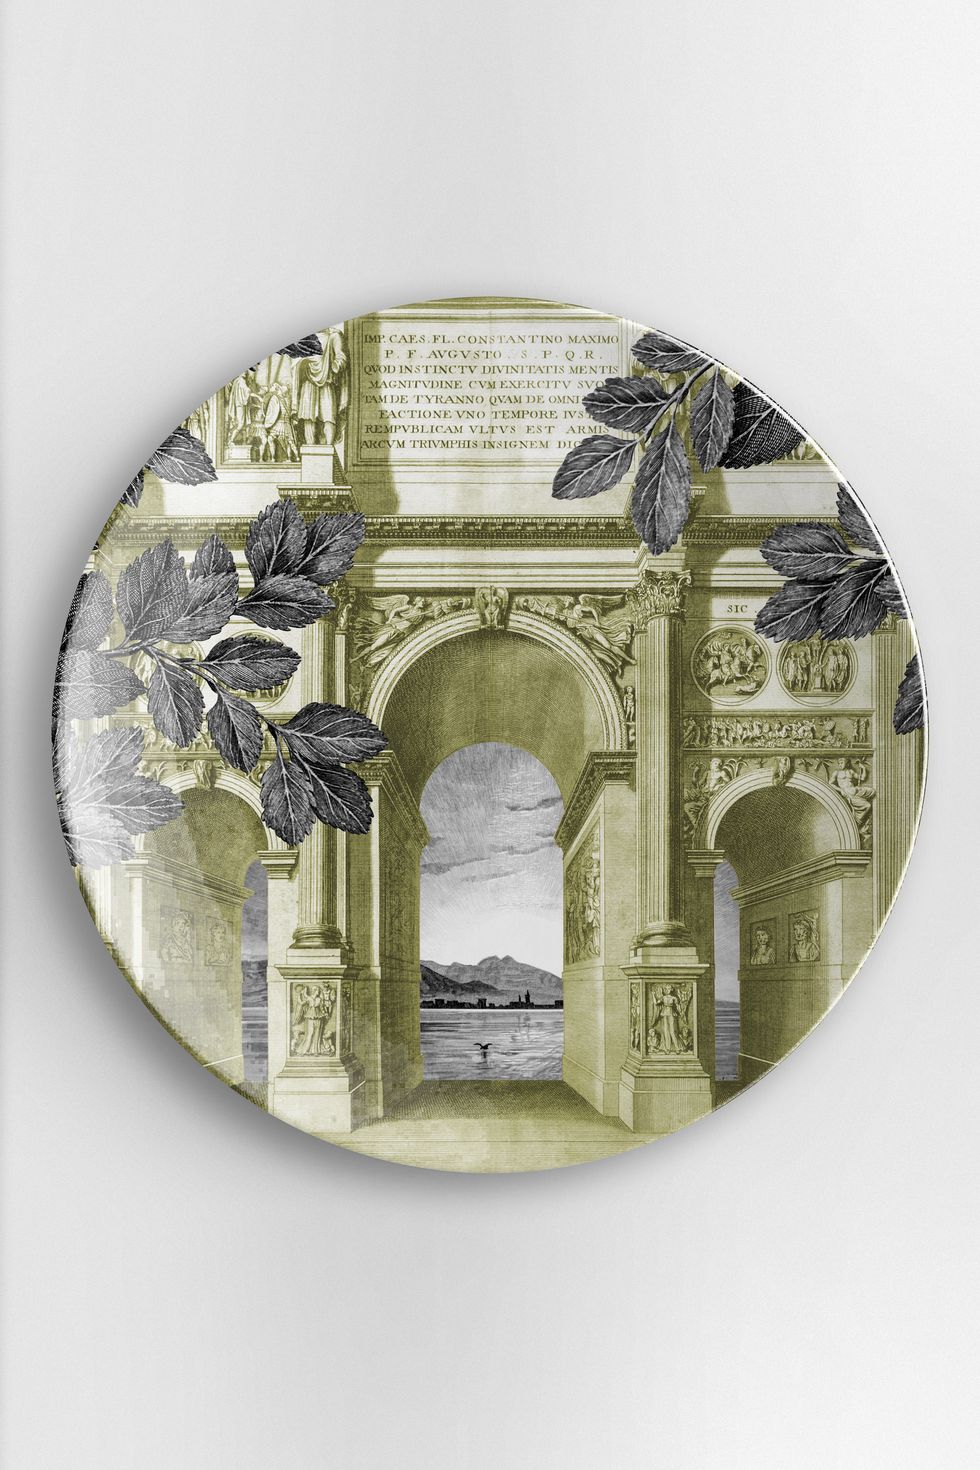 Arch, Triumphal arch, Architecture, Illustration, Circle, Currency, Stock photography, Plate, Dishware, Oval, 